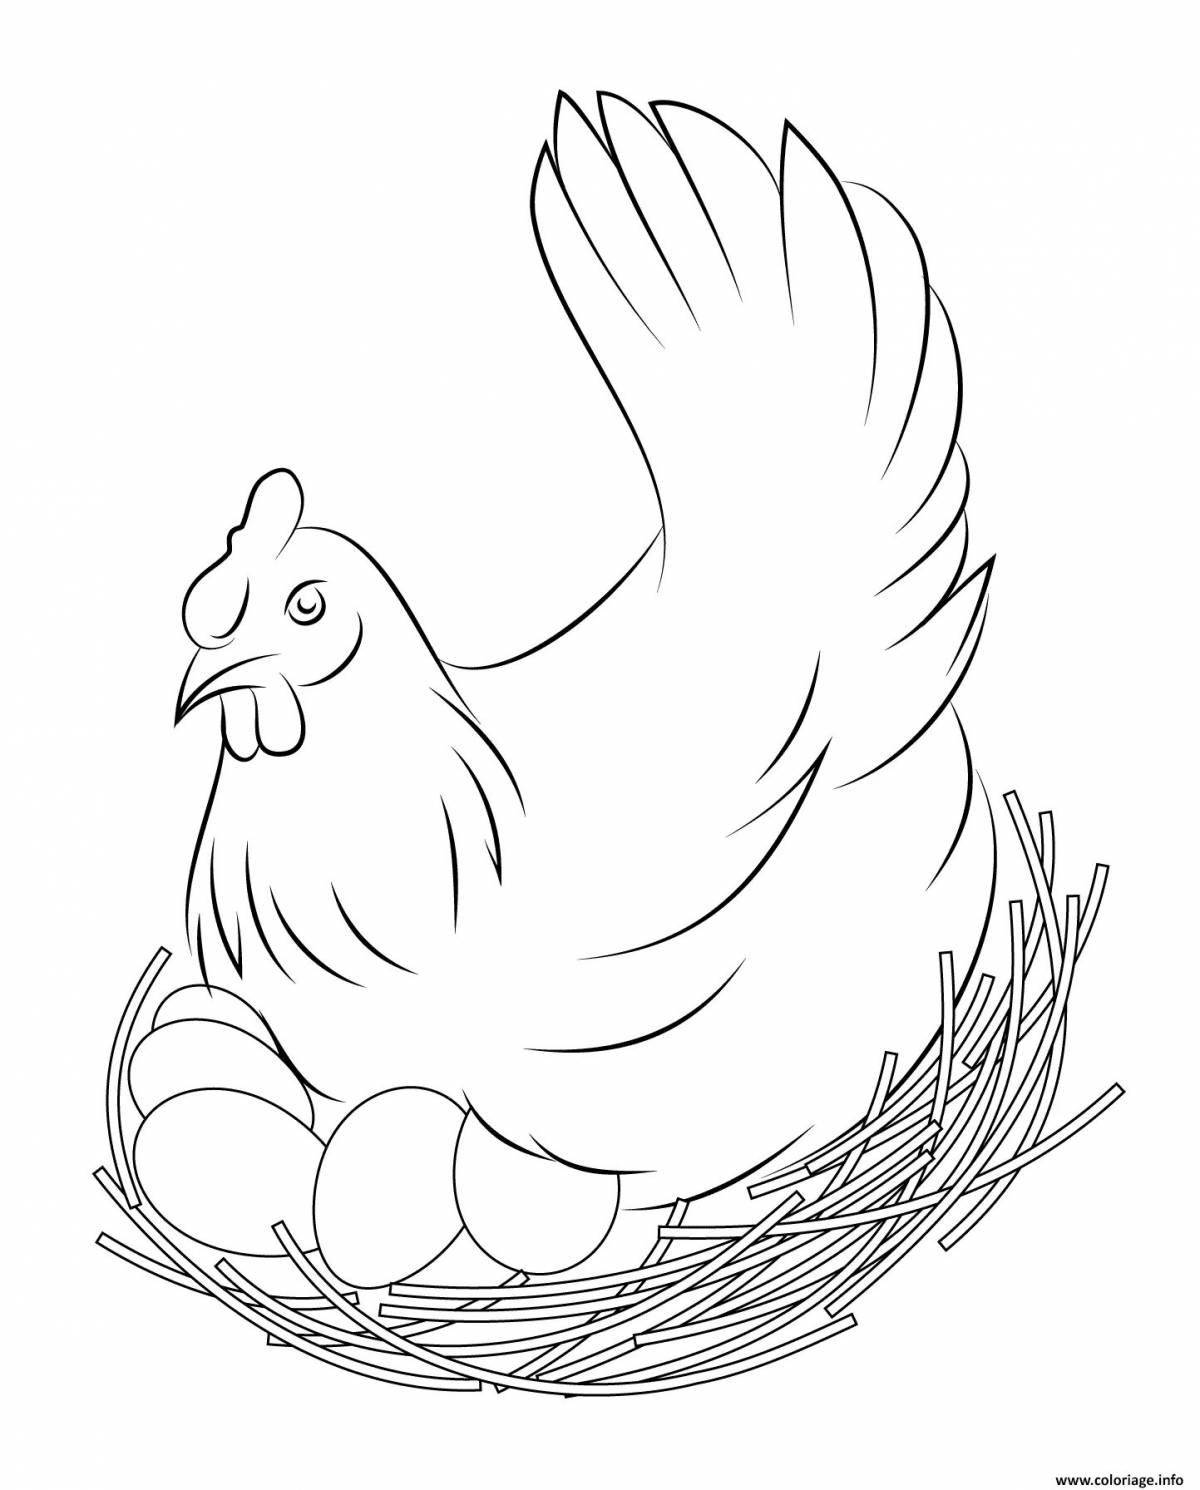 Chicken coloring book for kids